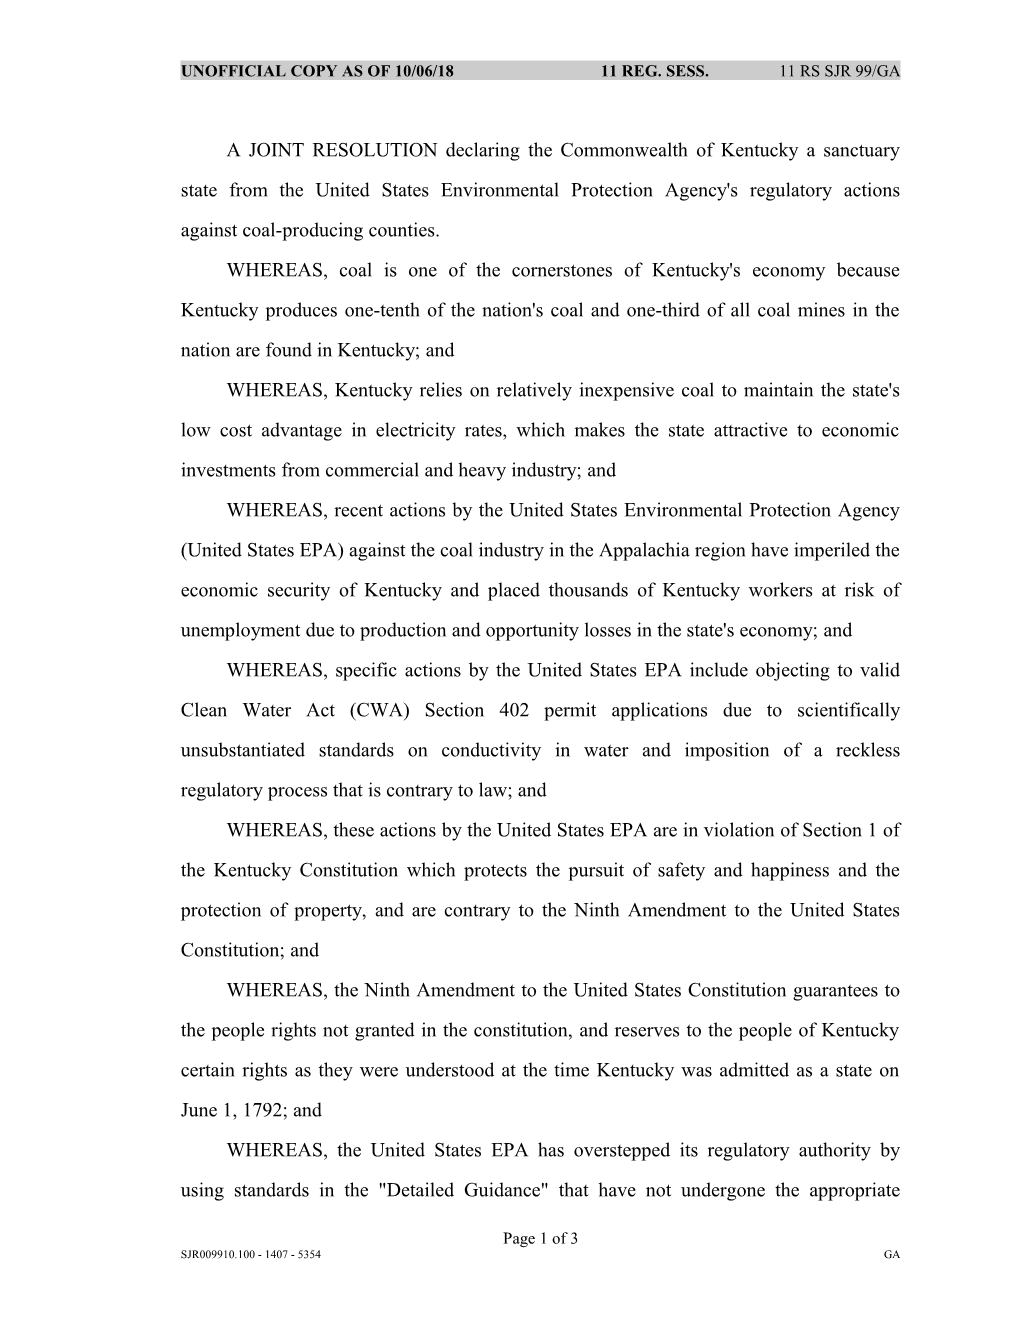 A JOINT RESOLUTION Declaring the Commonwealth of Kentucky a Sanctuary State from the United